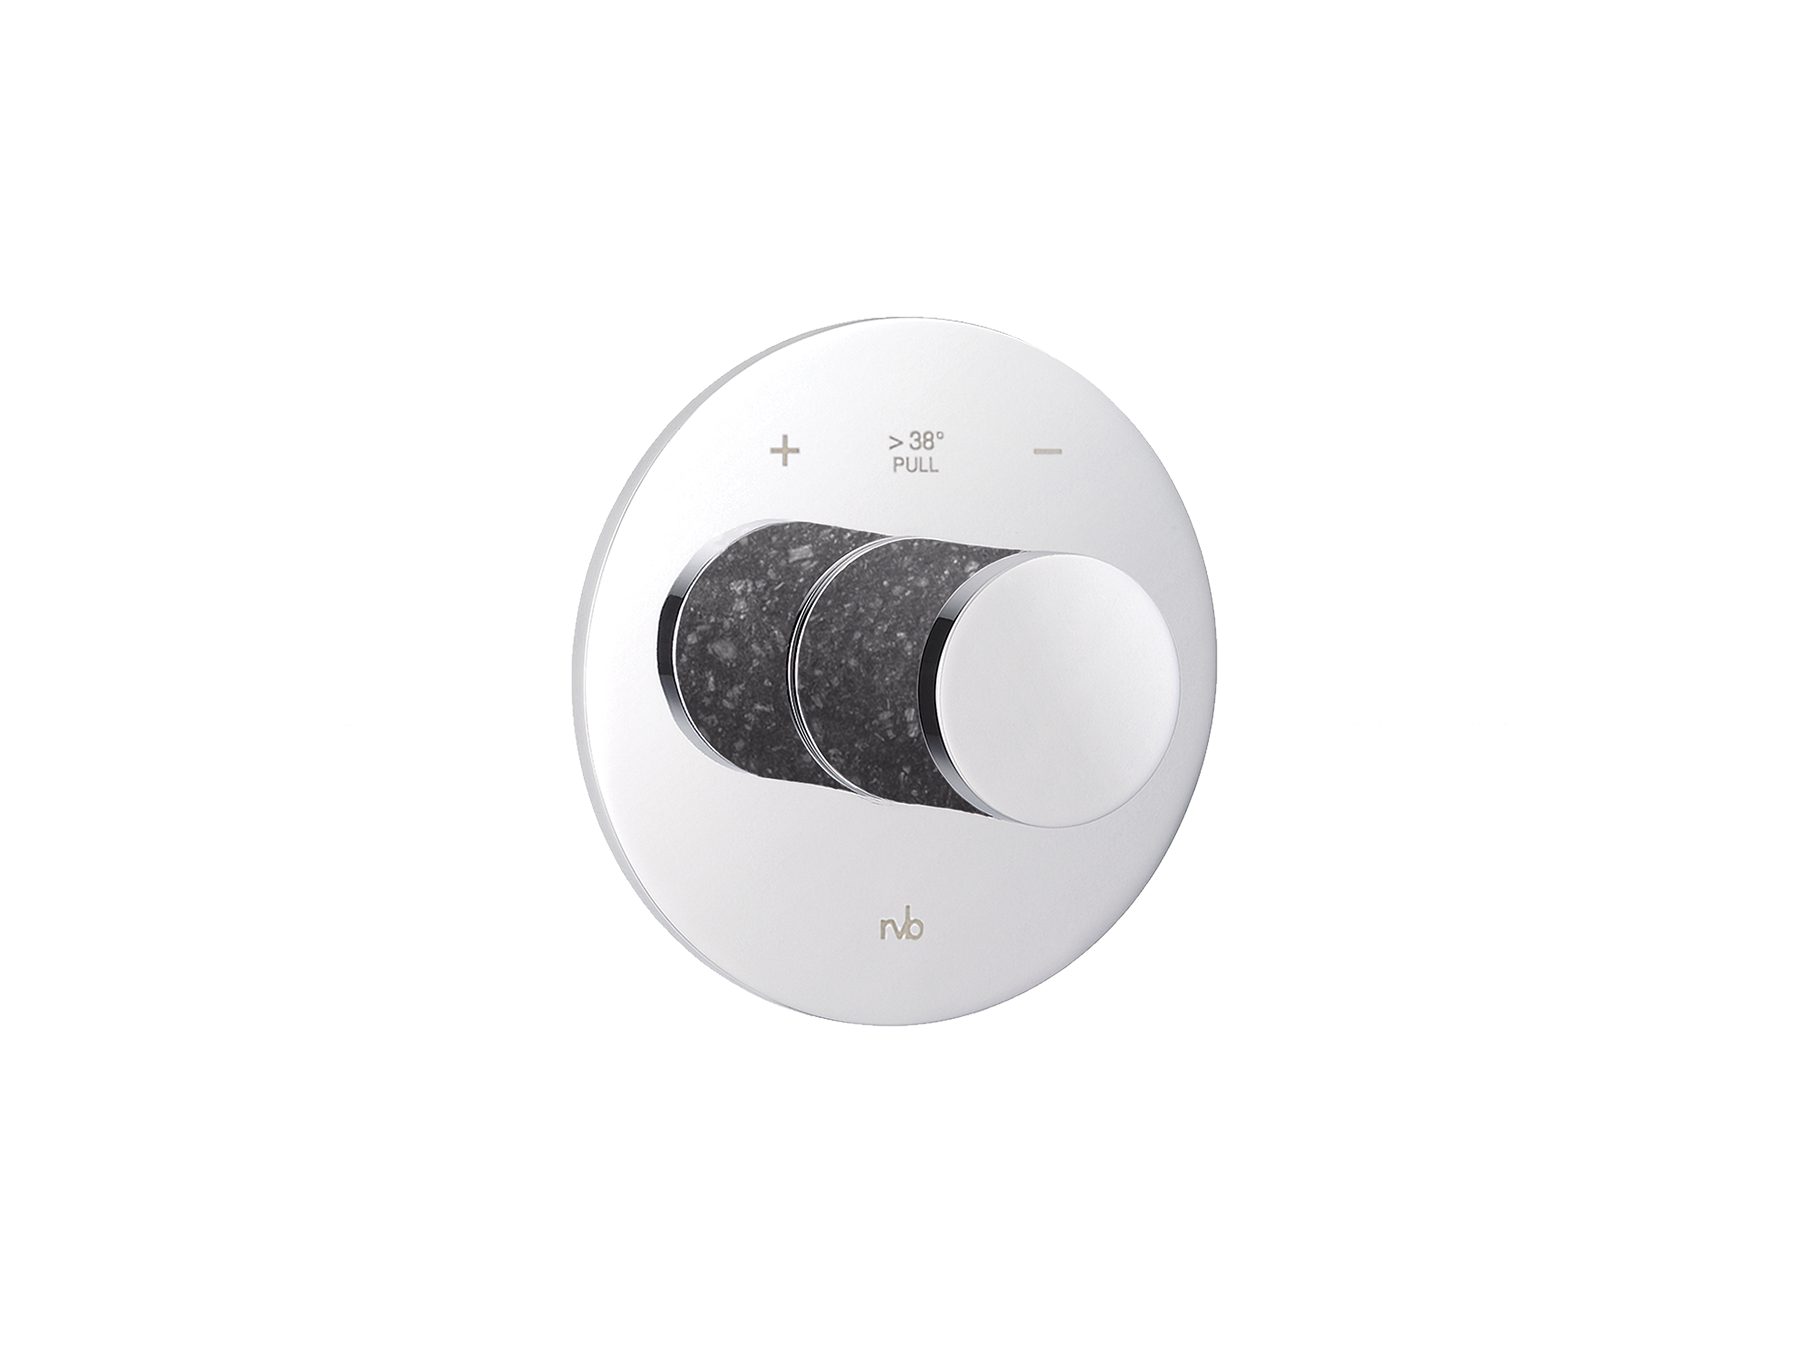 Concealed shower thermostat